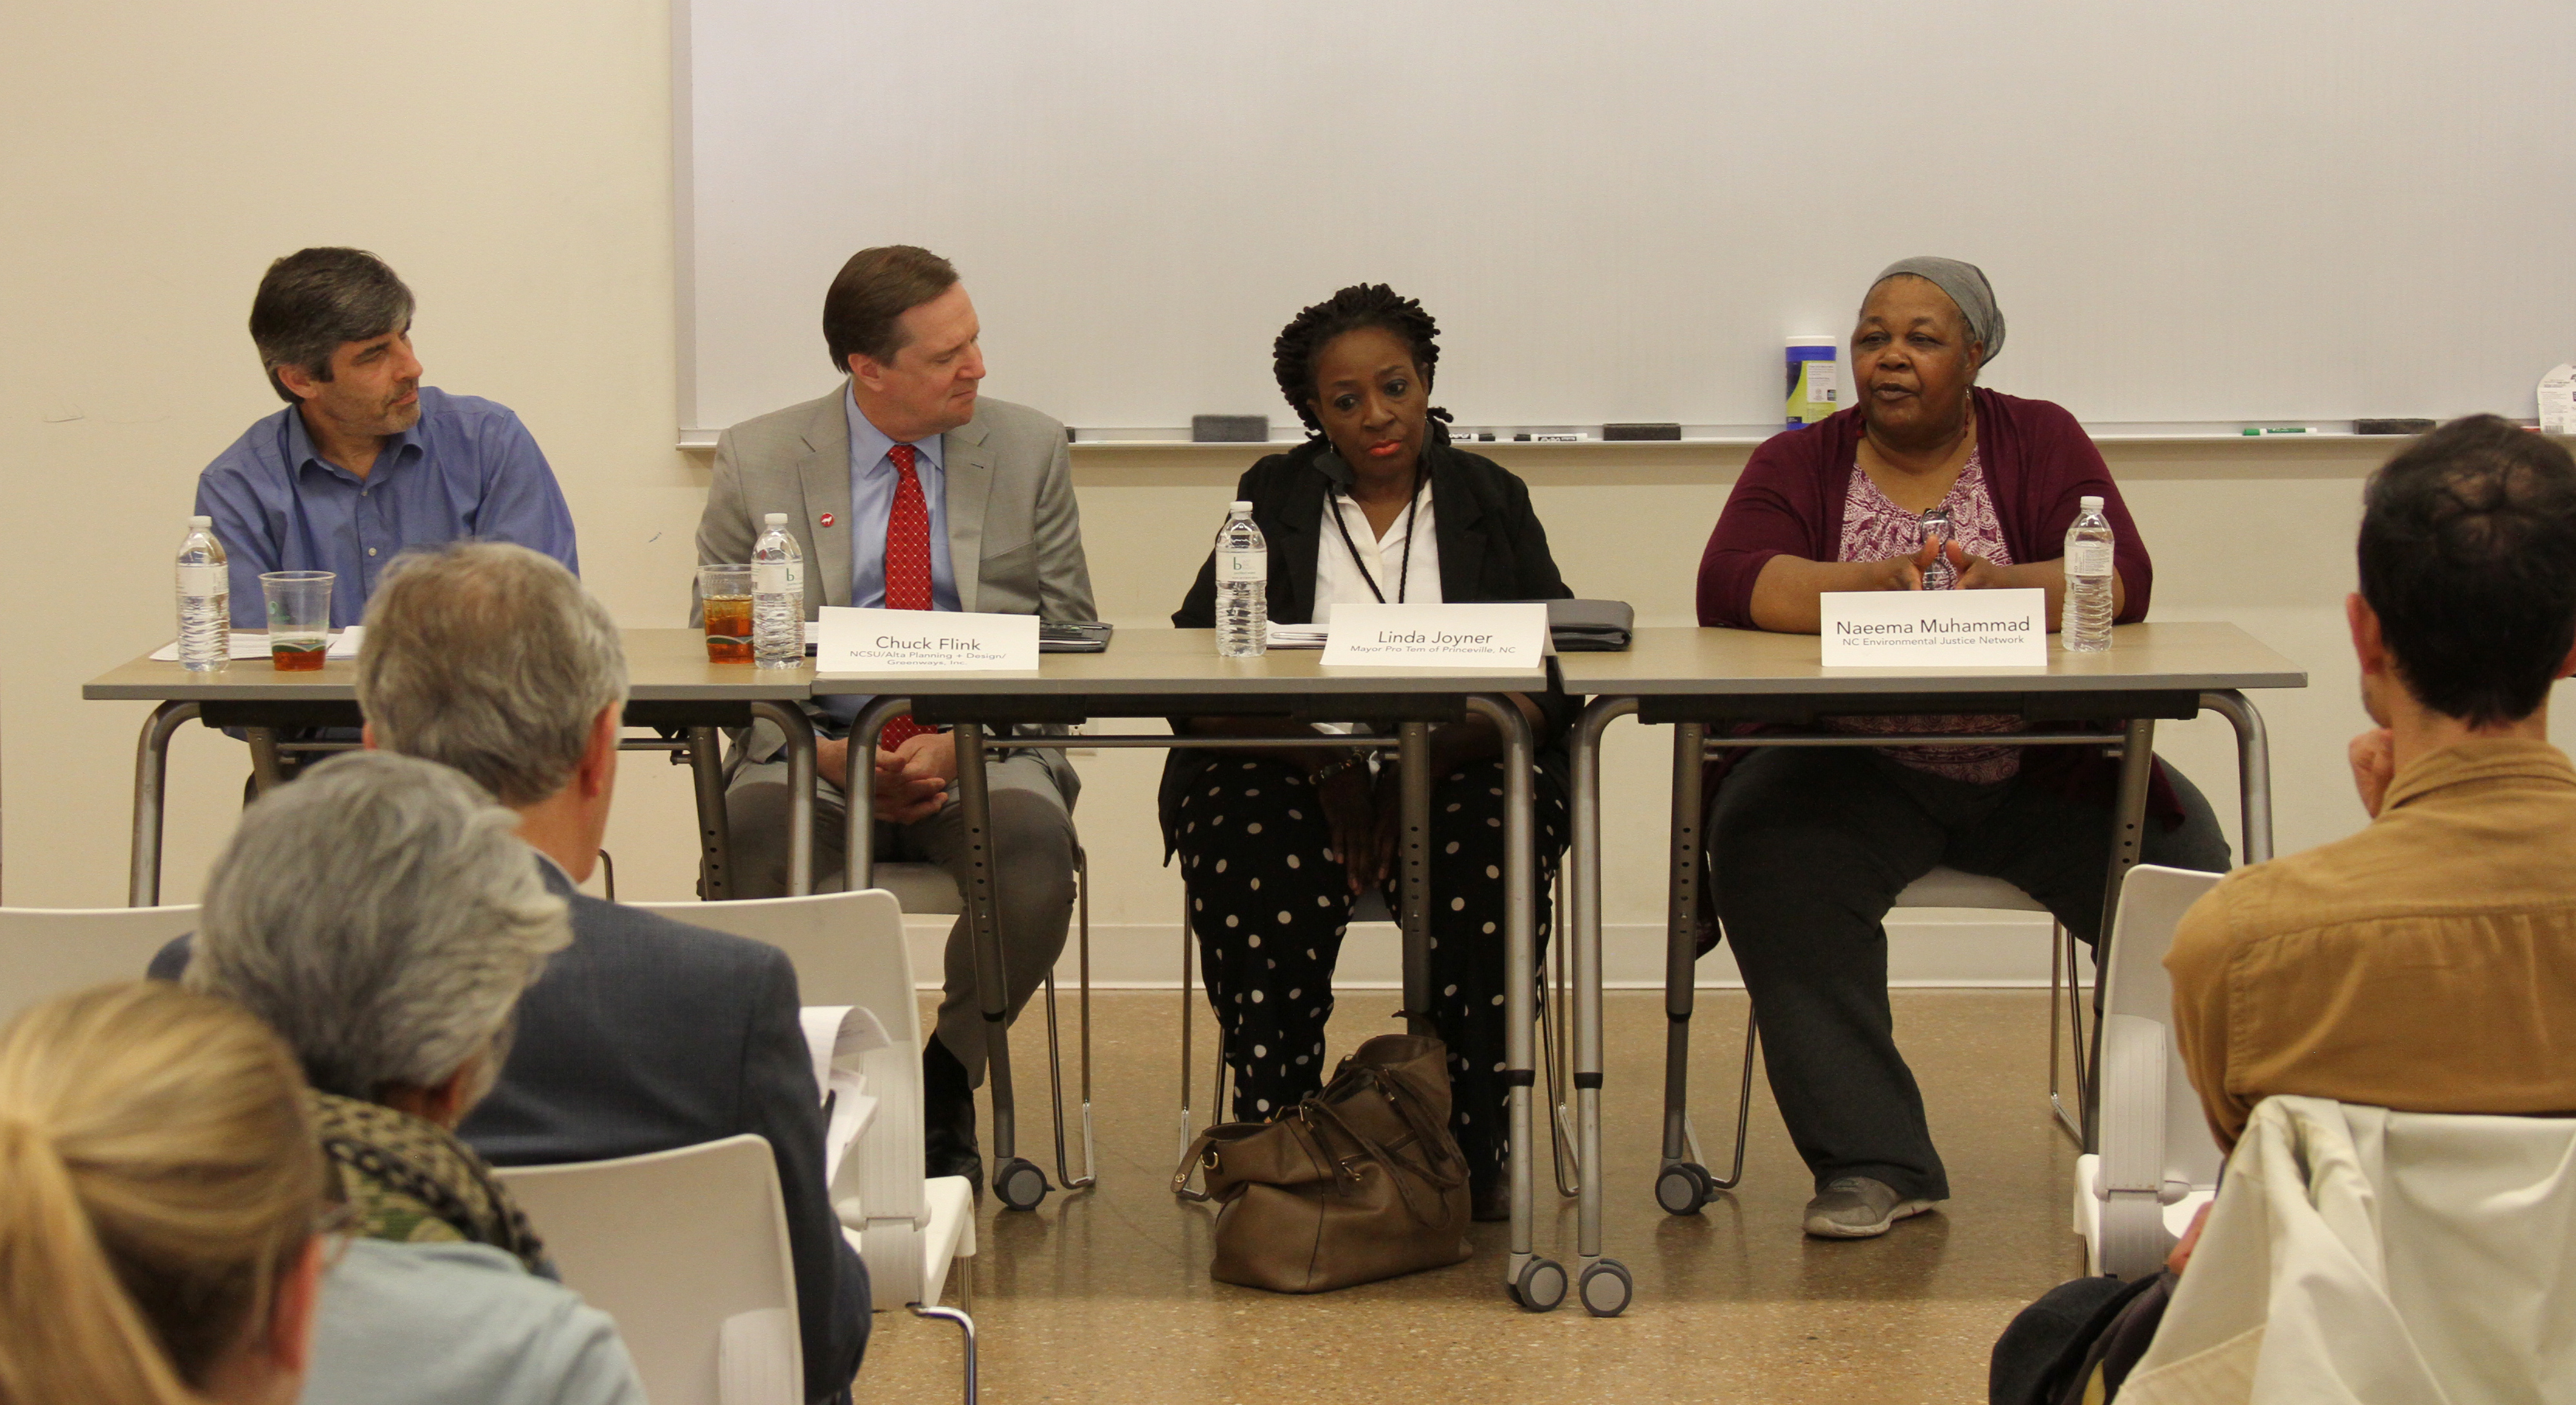 Naeema Muhammad, organizing co-director of North Carolina Environmental Justice Network (third from right) speaks on the “Rural Disaster Recovery and Hurricane Matthew” panel at the Climate Change and Resilience Symposium on April 20, 2018. The panel also included (from left) Dr. Larry Engel, professor in the UNC Department of Epidemiology; Chuck Flink, professor in Landscape Architecture at NC State University; and Linda Joyner, Mayor Pro Tem of Princeville, N.C.